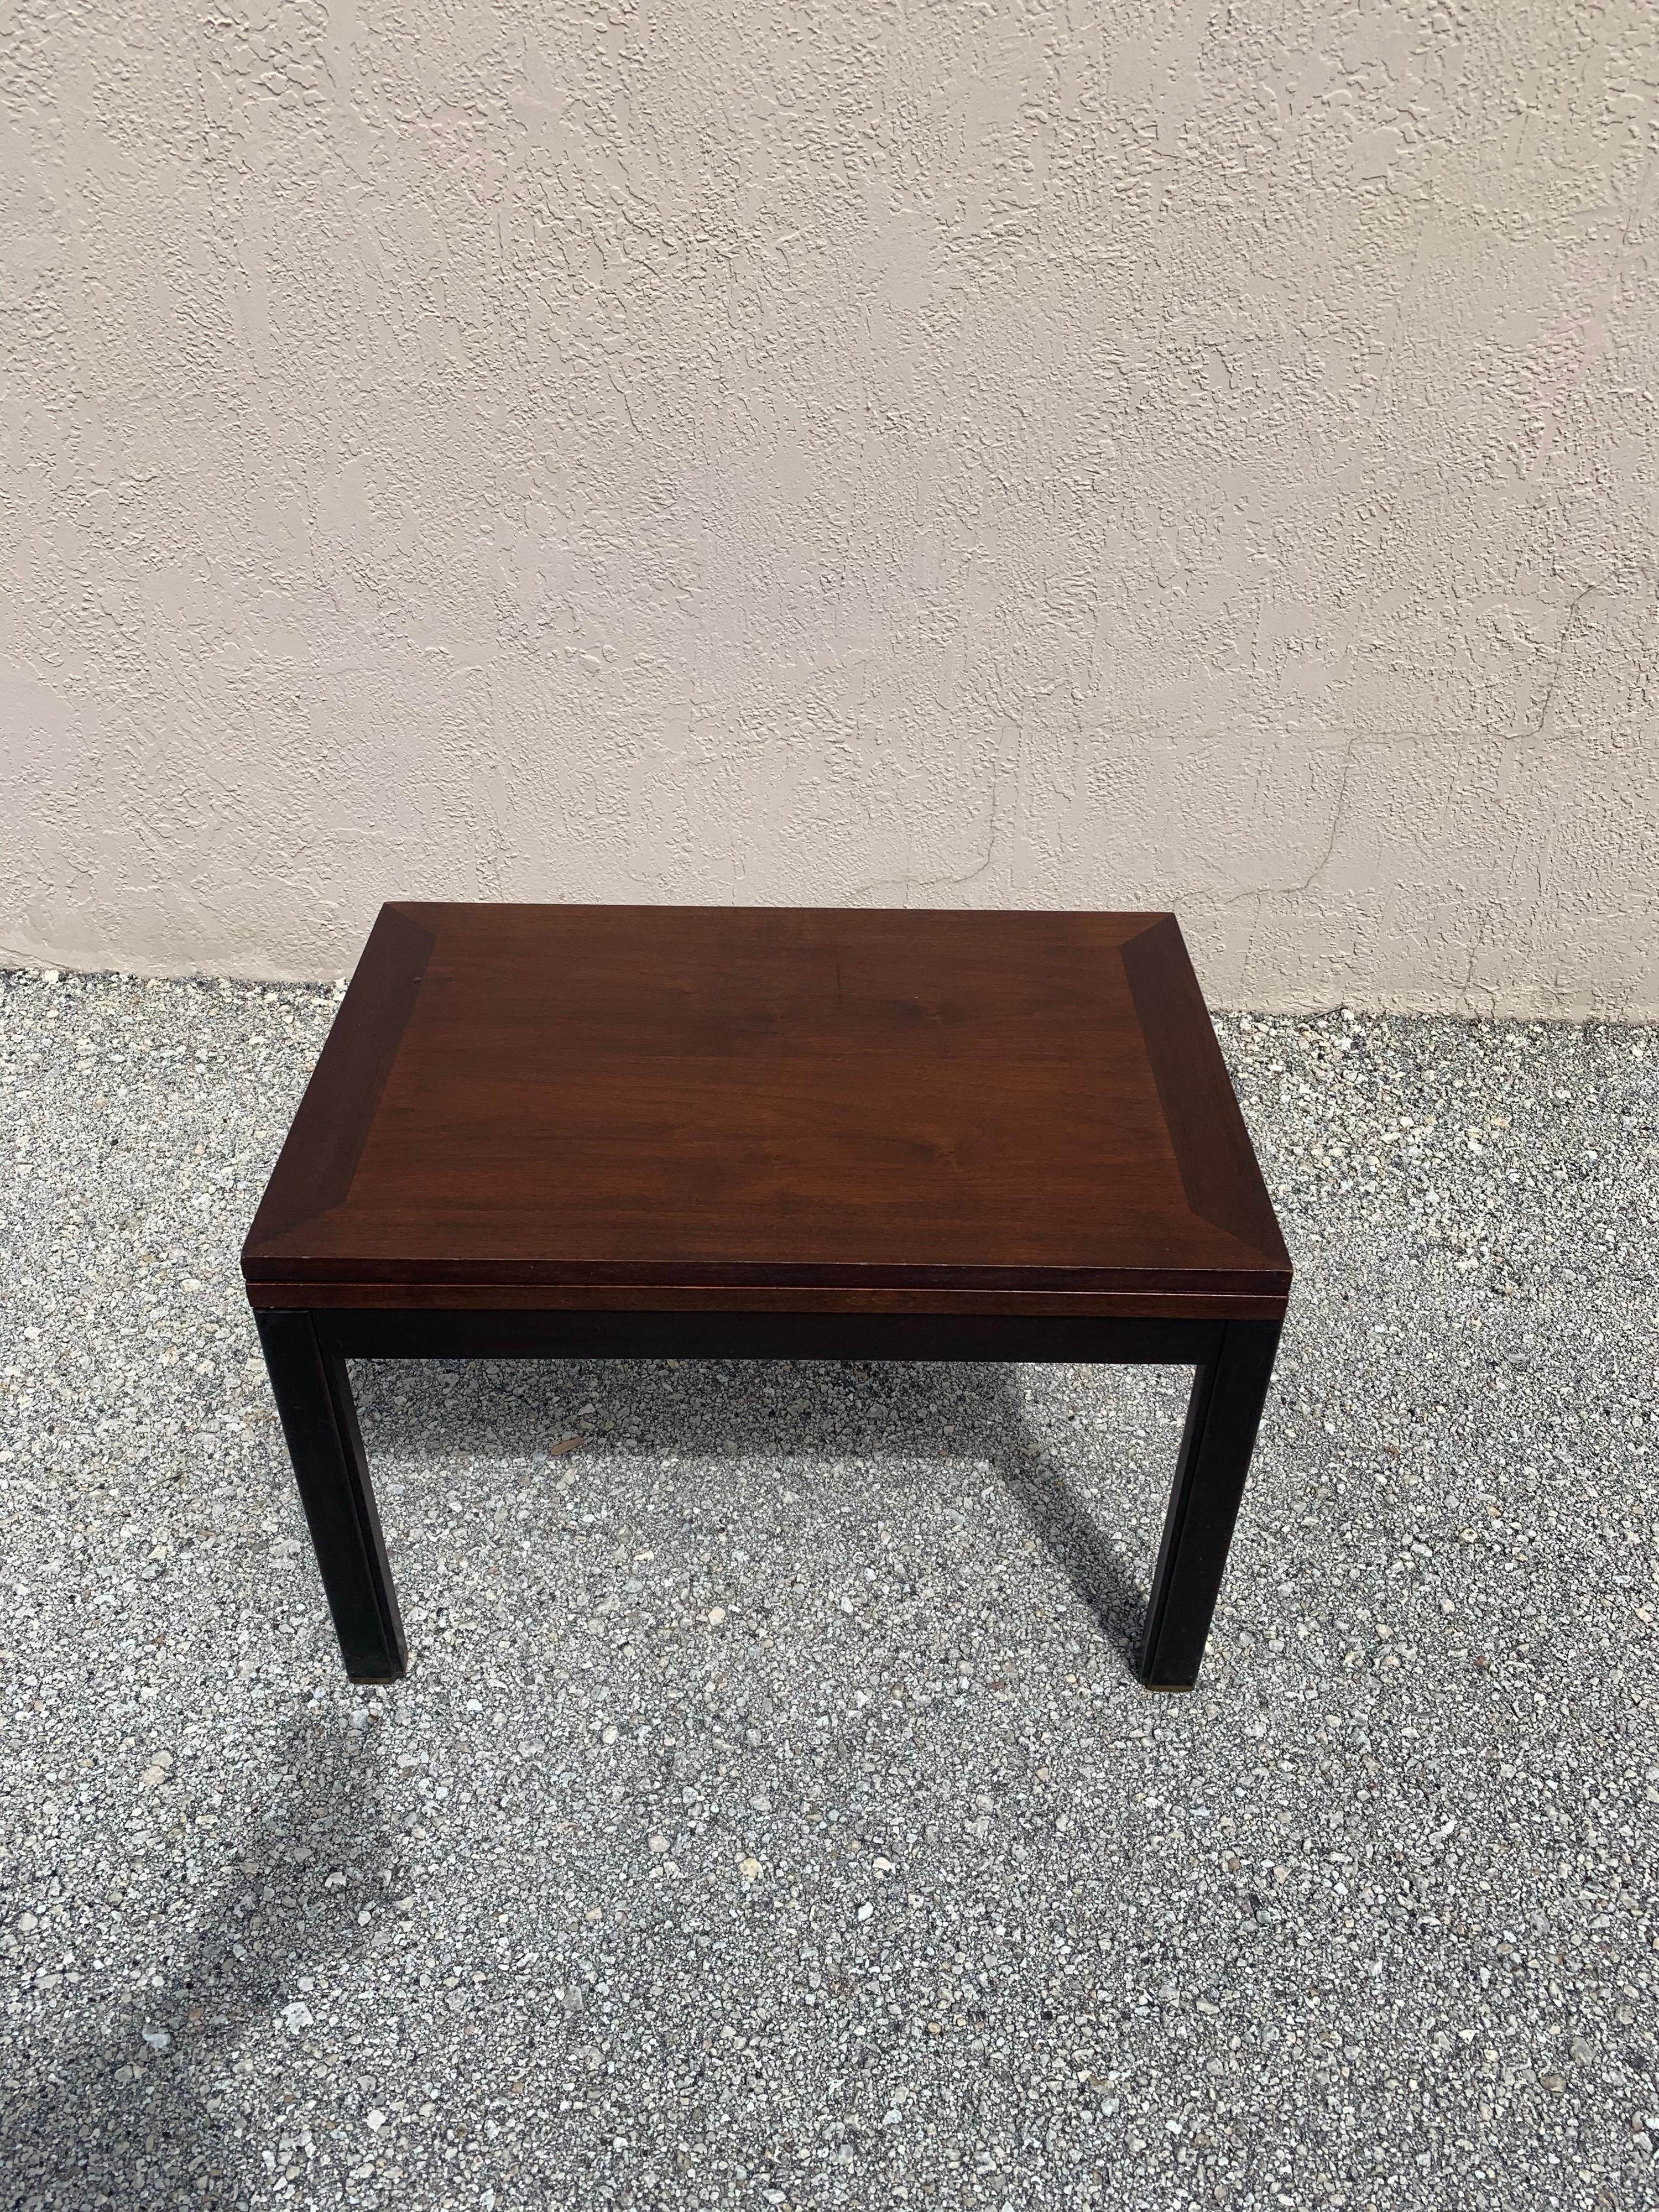 Flip top coffee table designed by Edward Wormley for Dunbar. In a dark espresso finish with brass capped feet. Table top starts at a 27” by 18” surface but with a quick spin and a flip opens up to a 36” by 27” surface. Turning the top exposes a